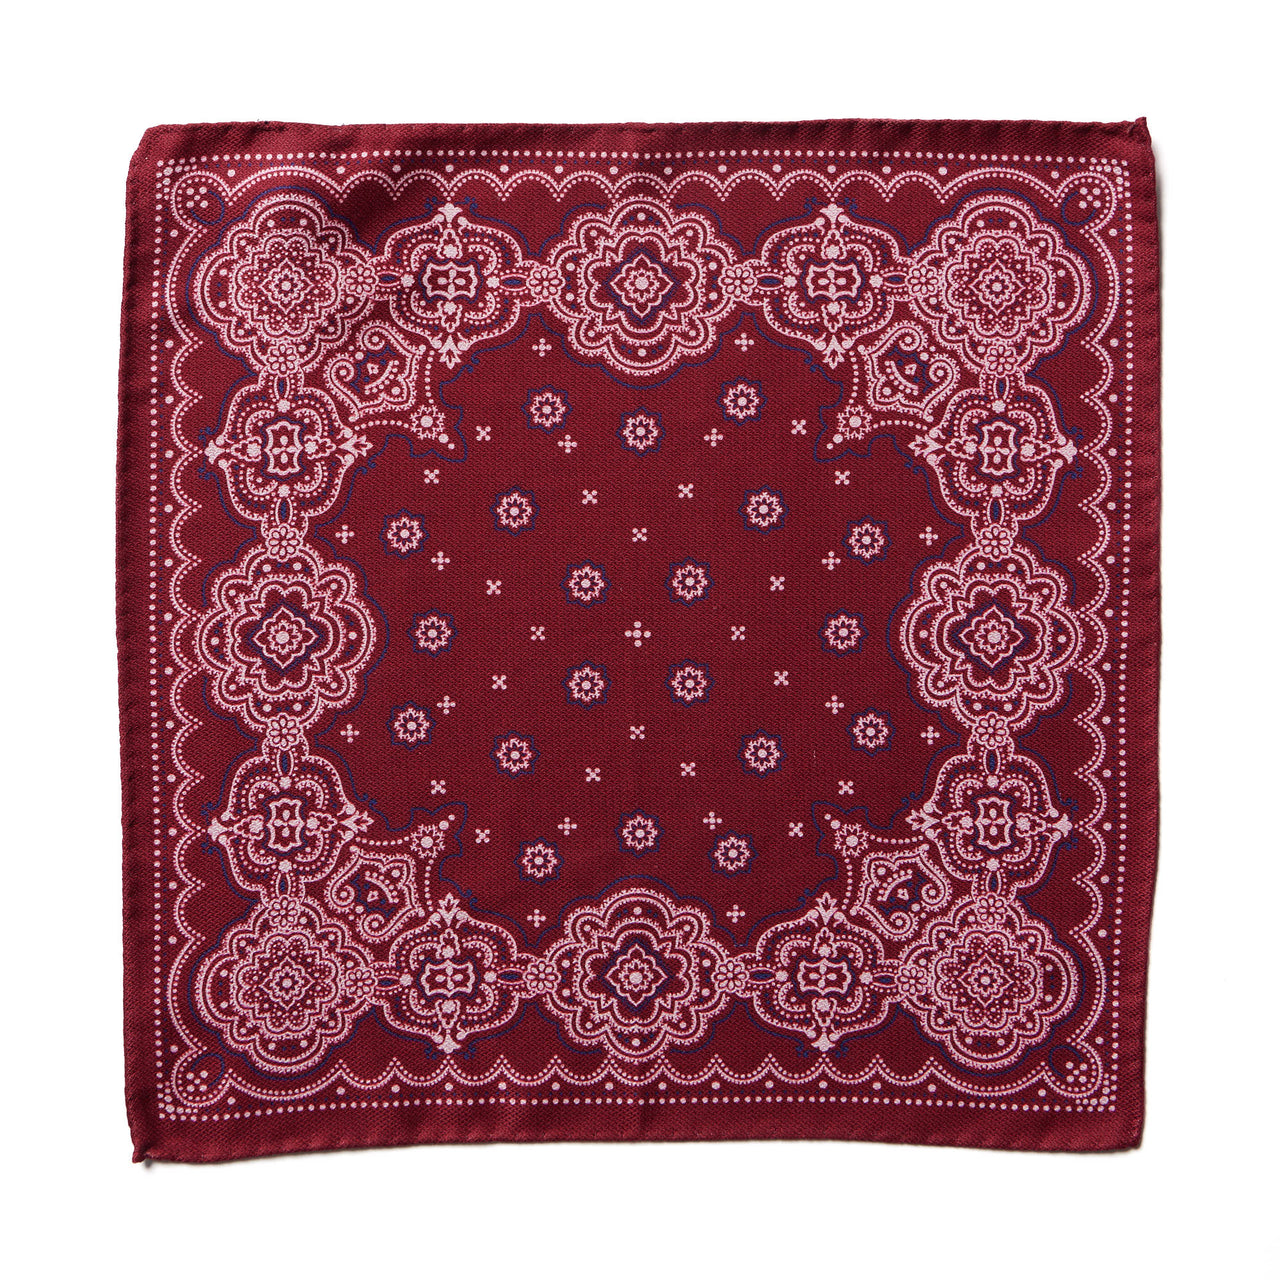 HENRY SARTORIAL X CANTINI Silk Pocket Square RED